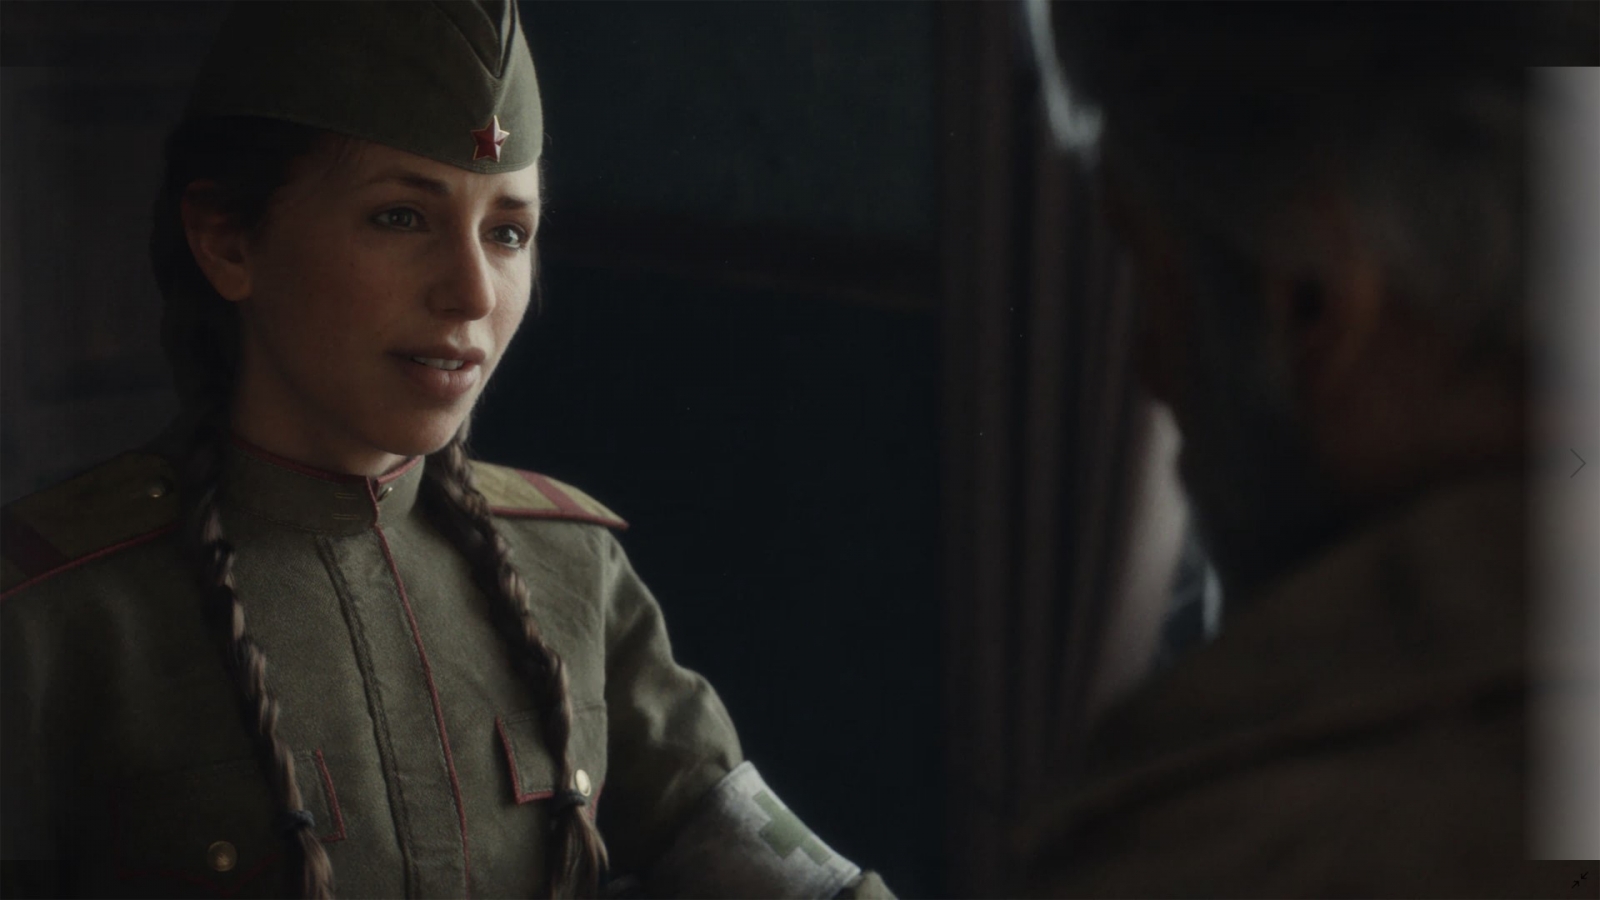 Post WWII-focused Call of Duty: Vanguard arrives Nov 5, will